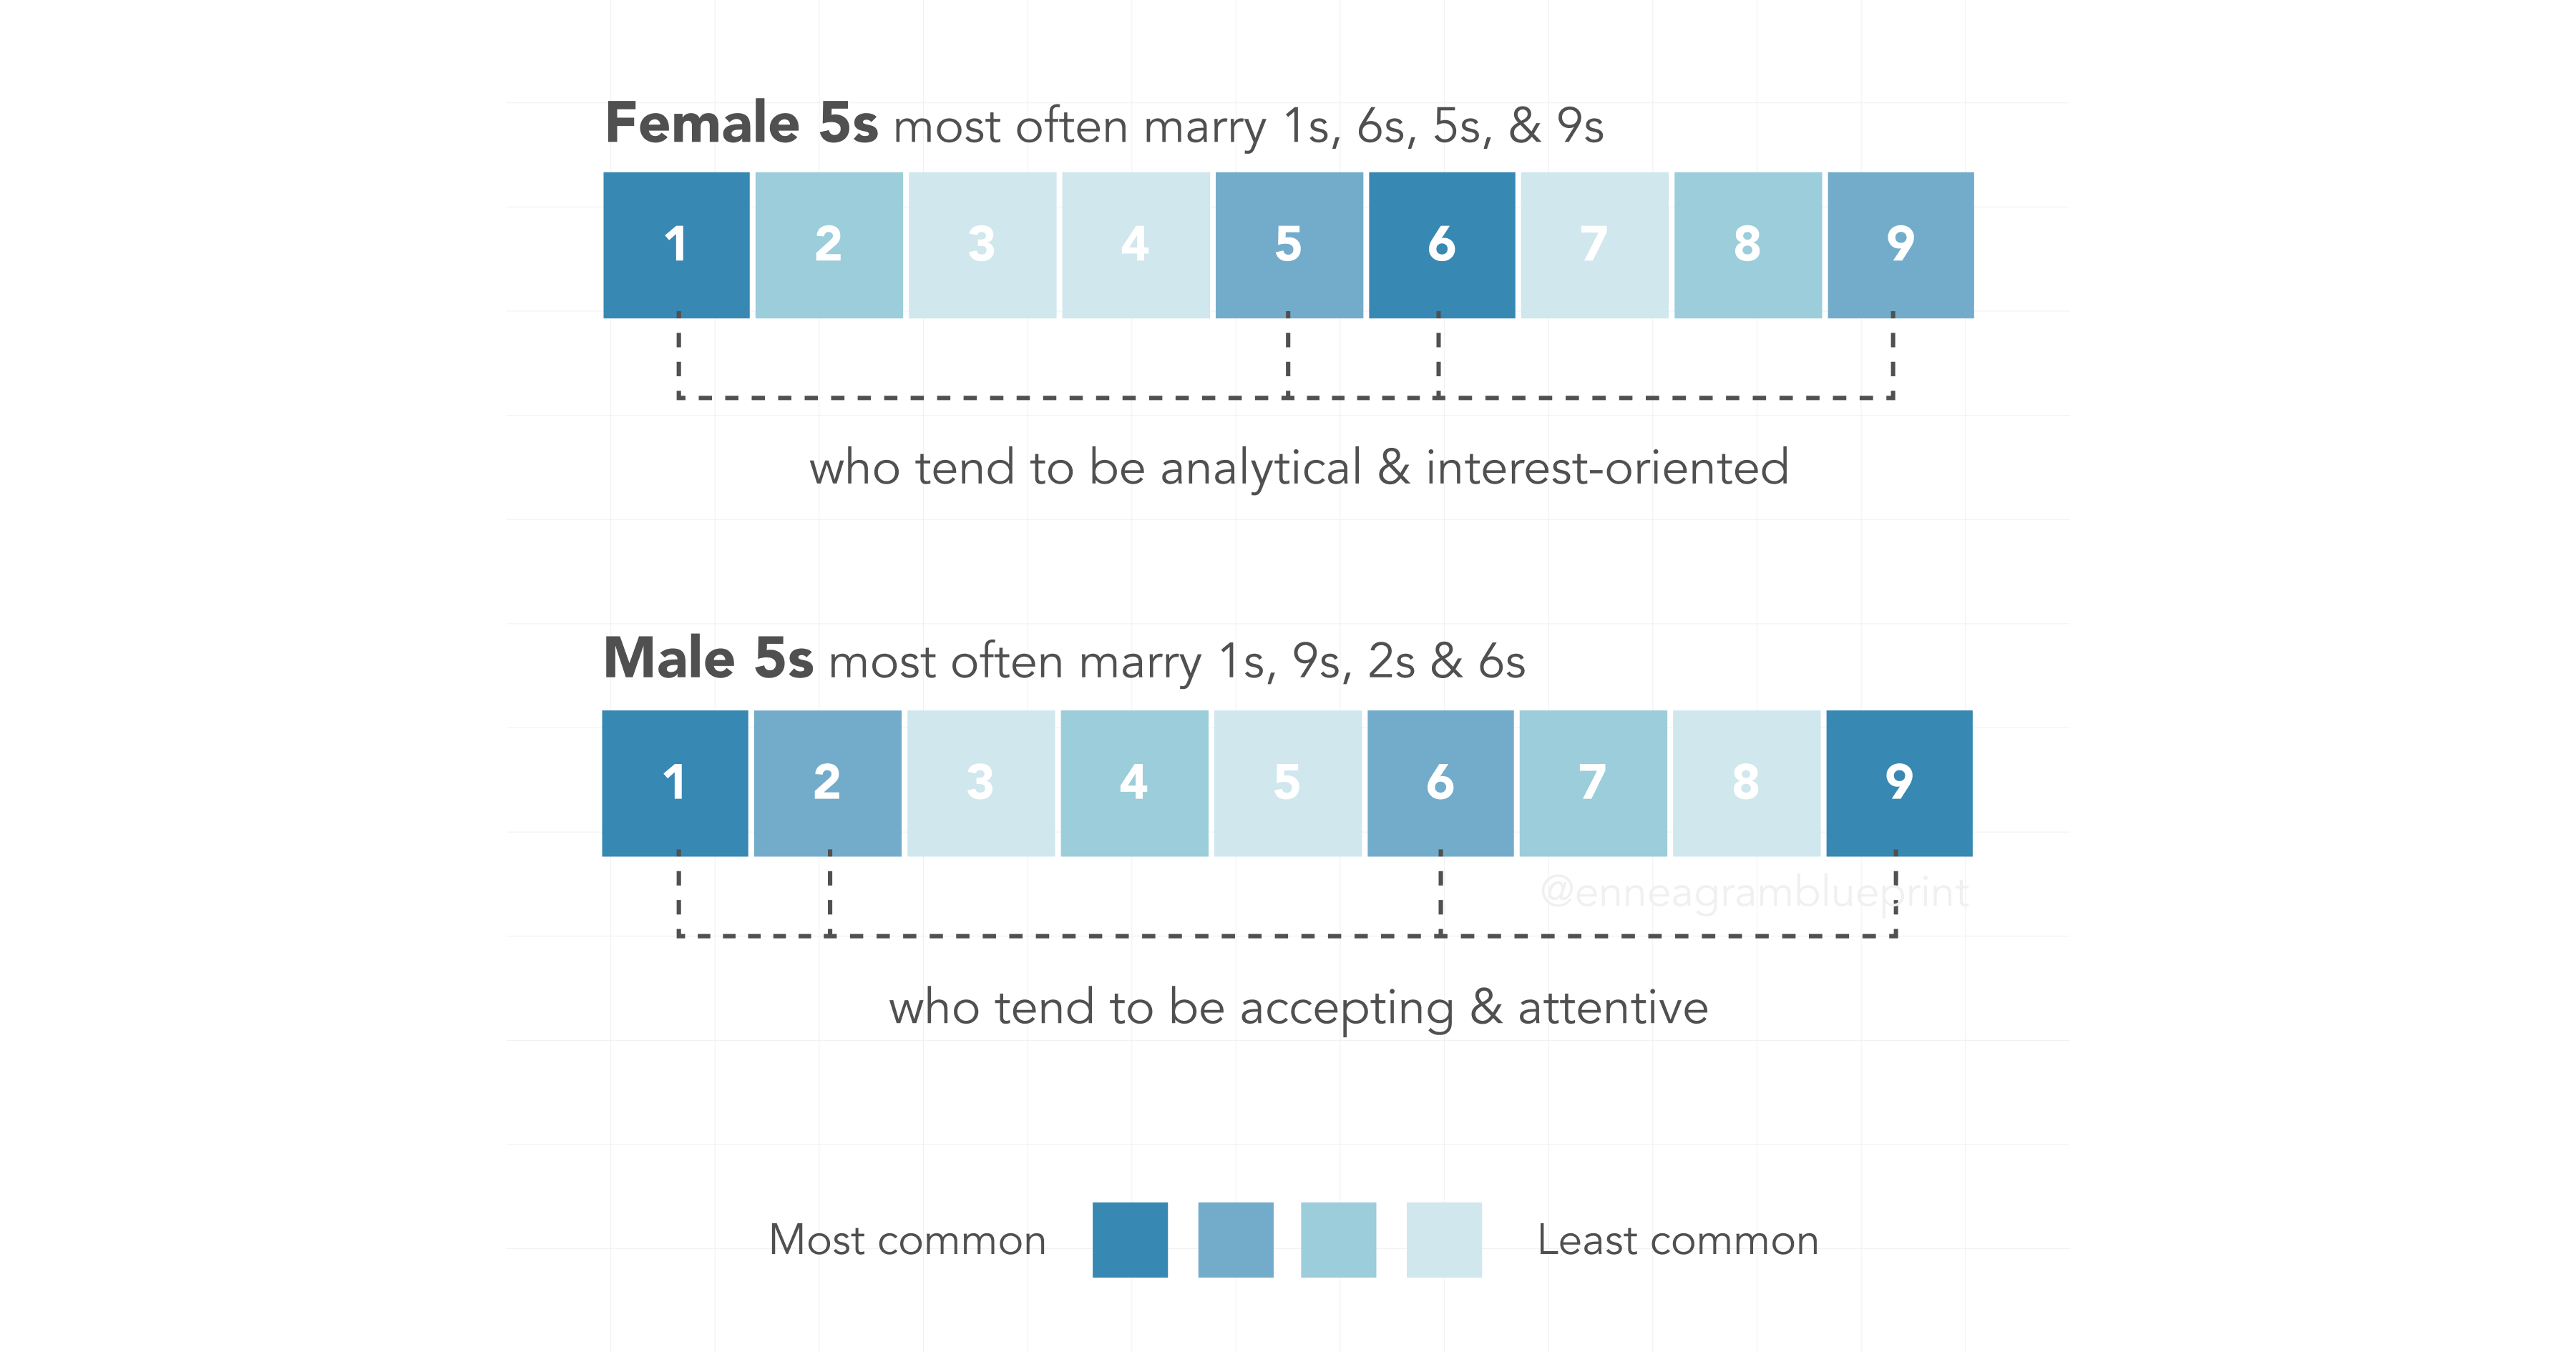 Female 5s most often marrying 1s, 6s, 5s, and 9s, and Male 5s most often marrying 1s, 9s, 2s, and 6s (in that order). 